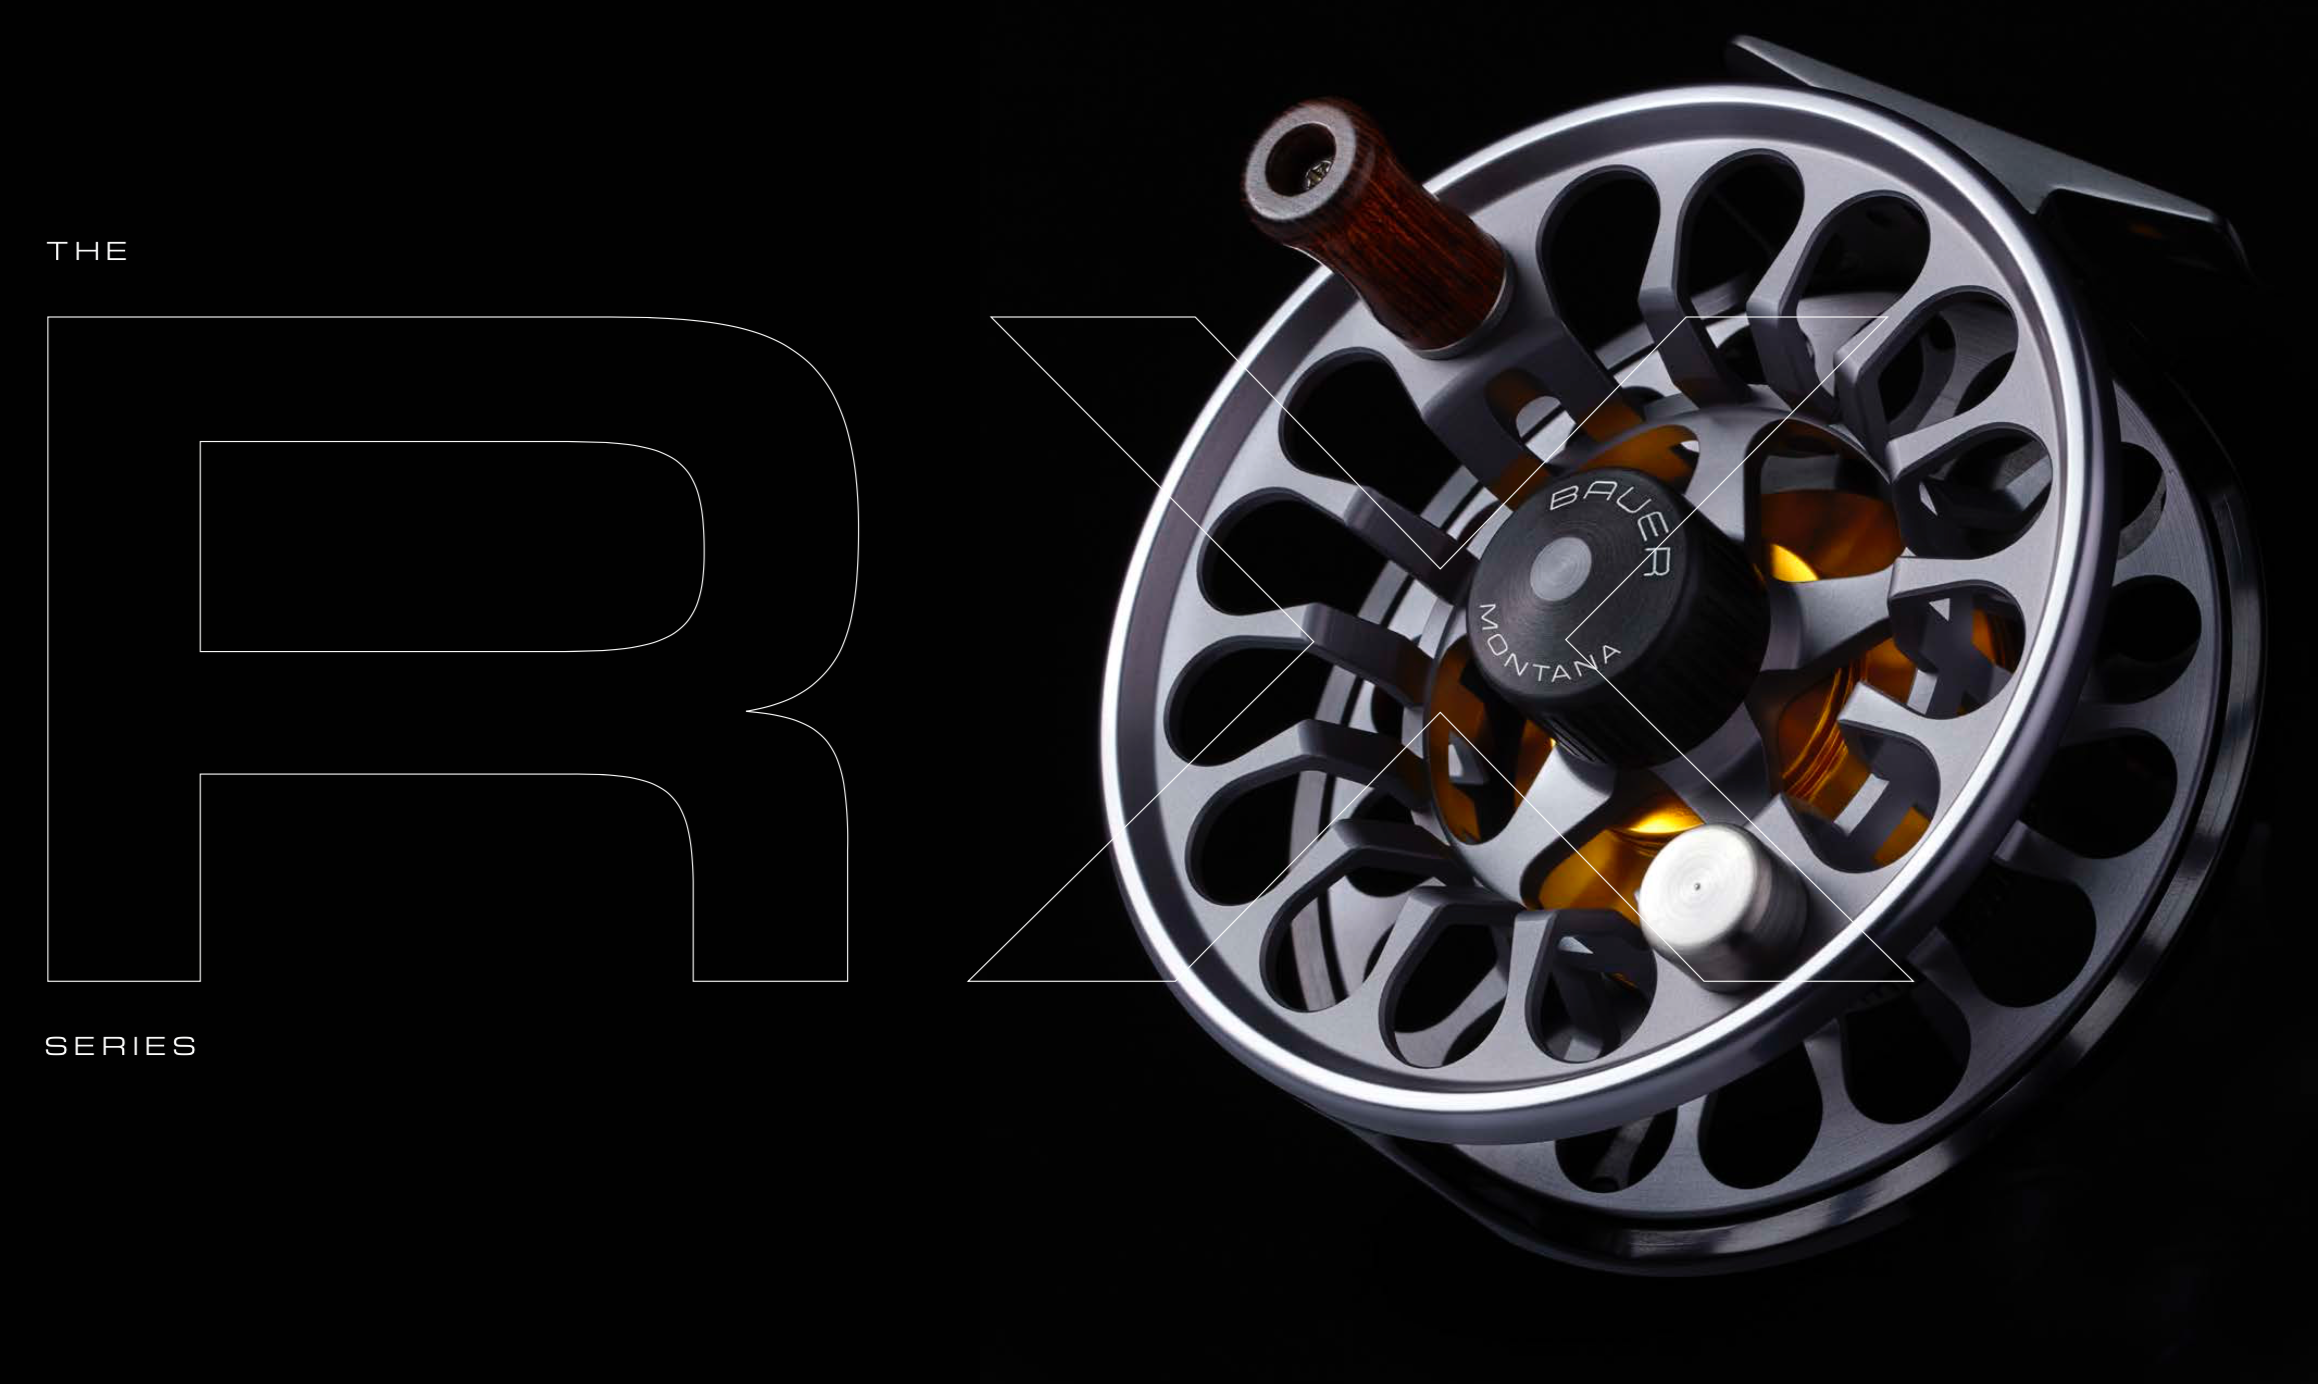 Bauer RX Saltwater Fly Reels (7-13wt) - Graphite/Charcoal